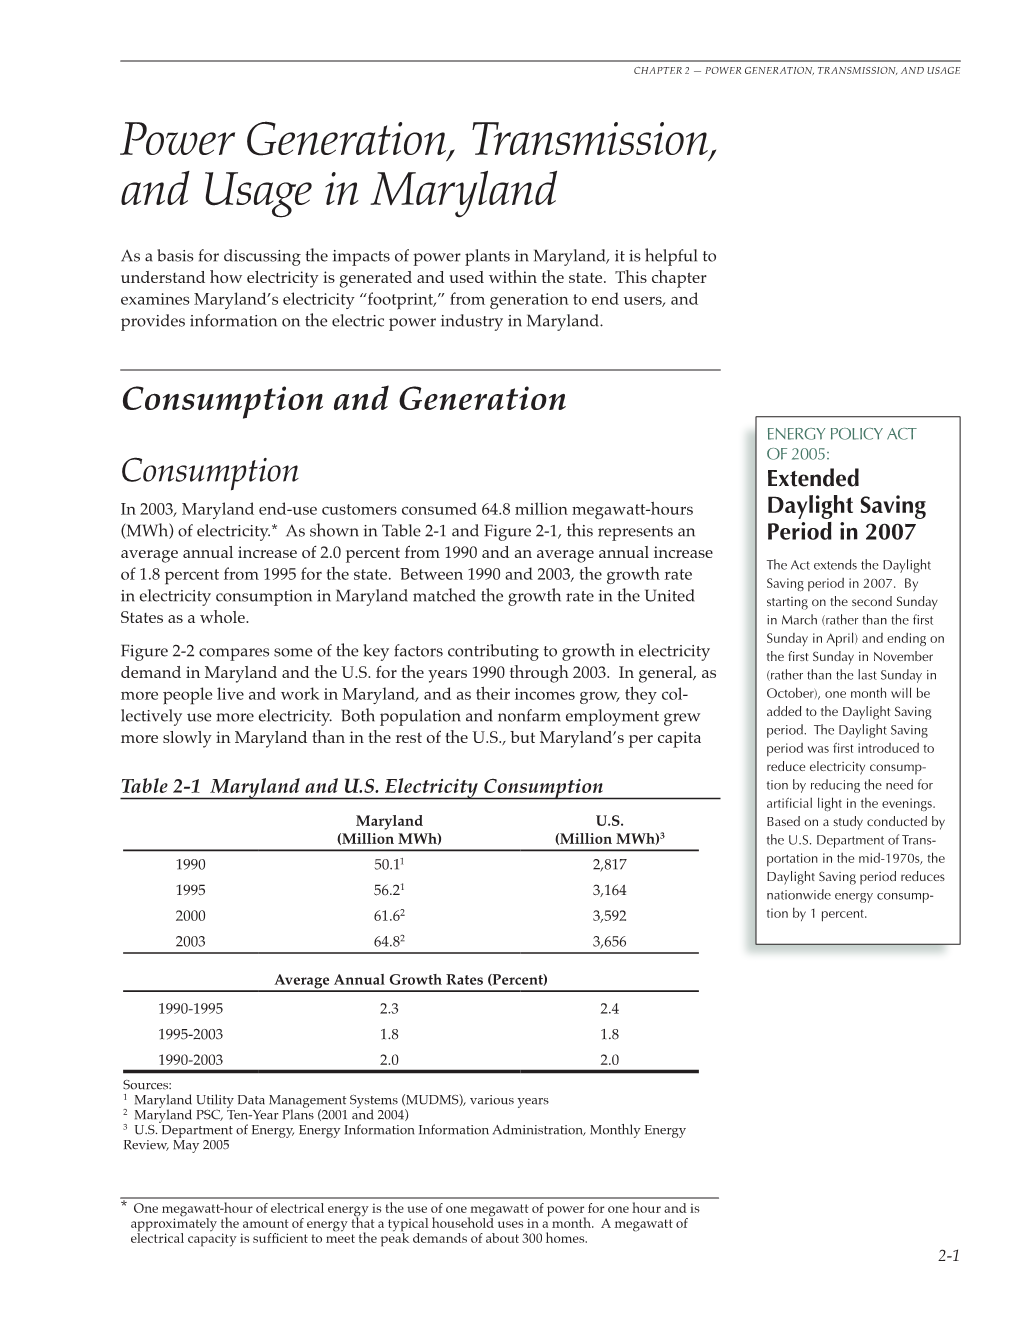 Power Generation, Transmission, and Usage in Maryland